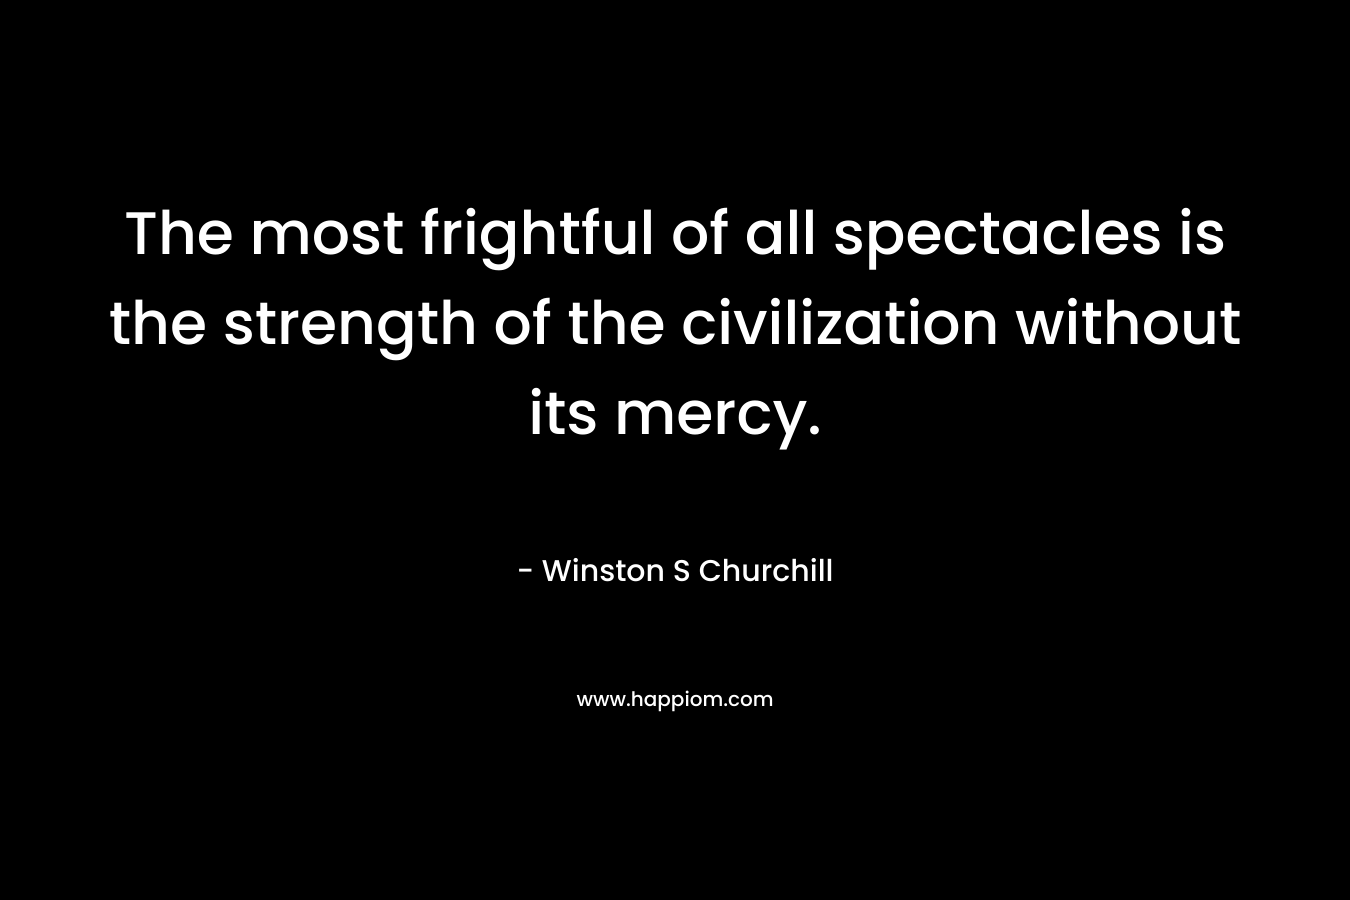 The most frightful of all spectacles is the strength of the civilization without its mercy.